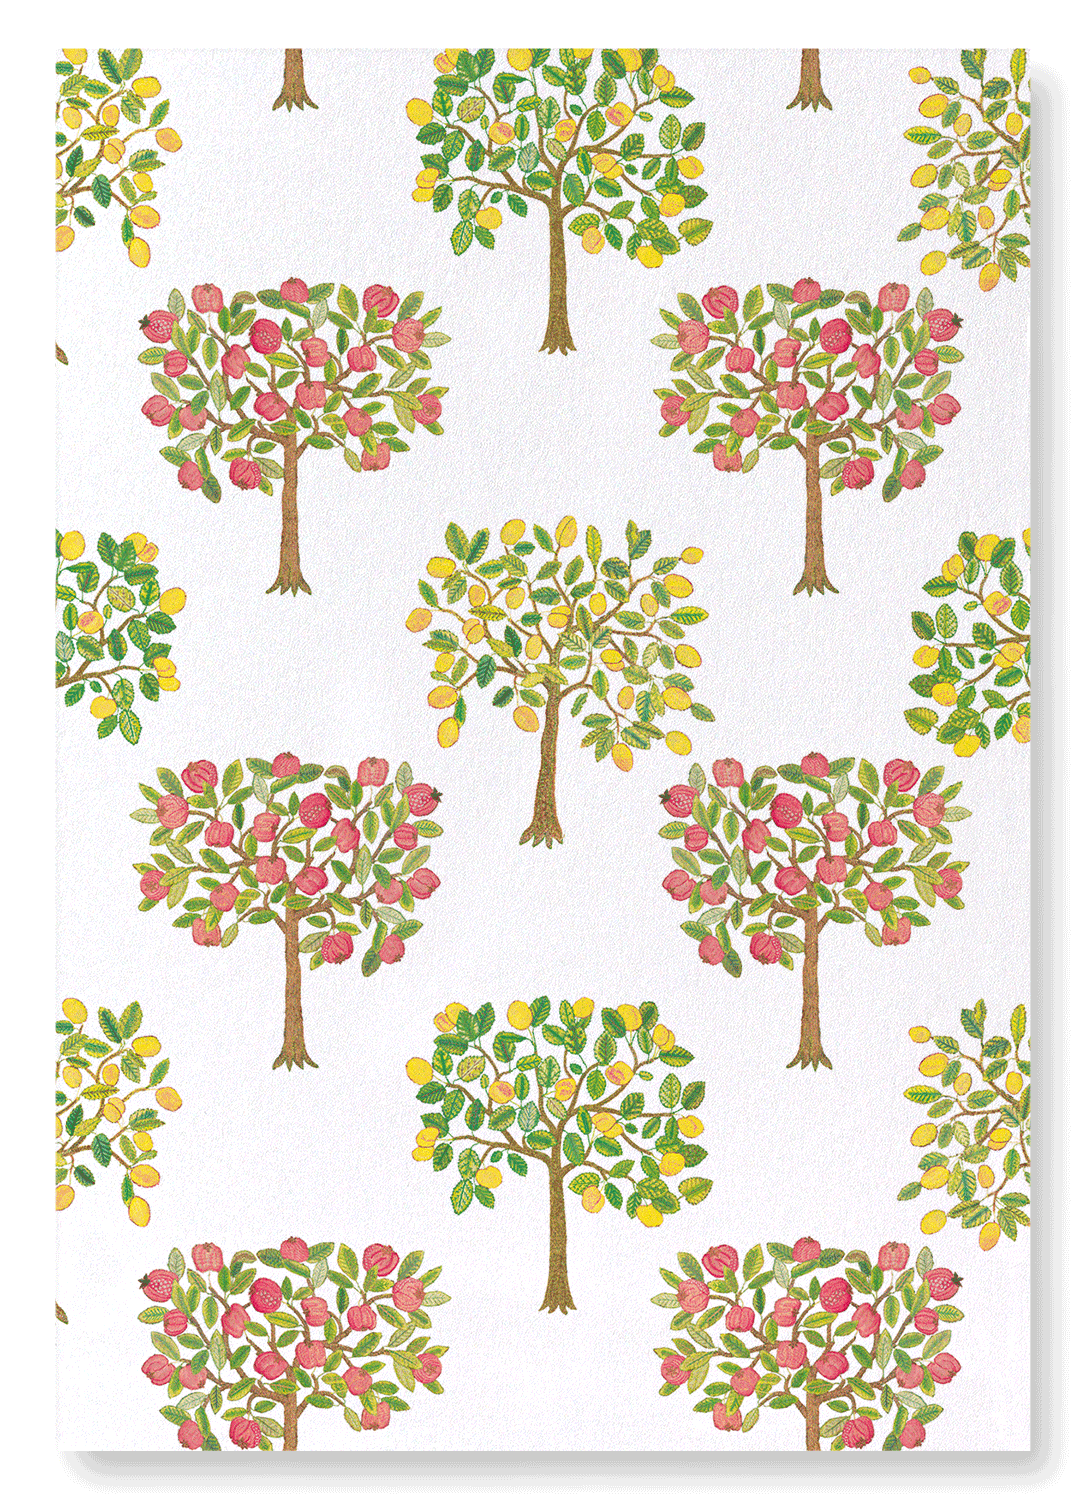 EMBROIDERY OF POMEGRANATE AND LEMON TREES ON WHITE (16TH C.)